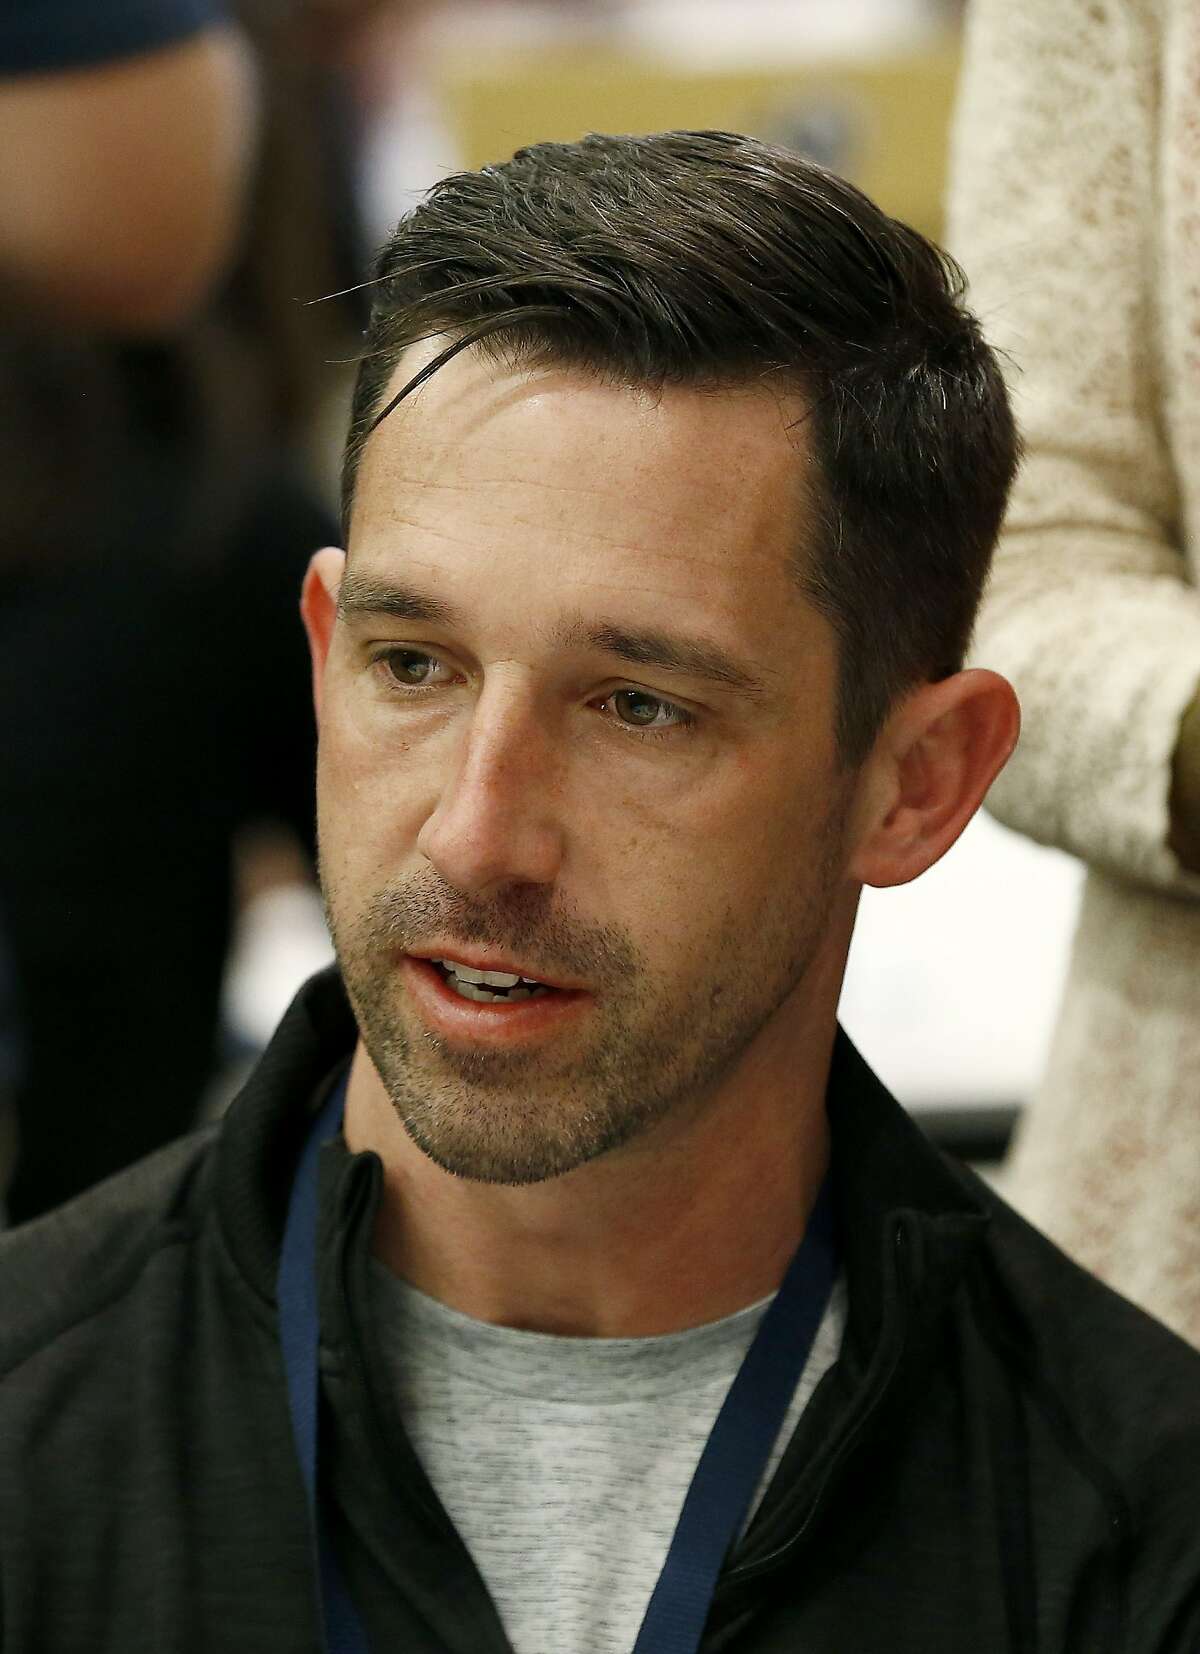 San Francisco 49ers head coach Kyle Shanahan answers a question from a reporter during the NFC Head Coaches Breakfast at the NFL football annual meetings Wednesday, March 29, 2017, in Phoenix. (AP Photo/Ross D. Franklin)